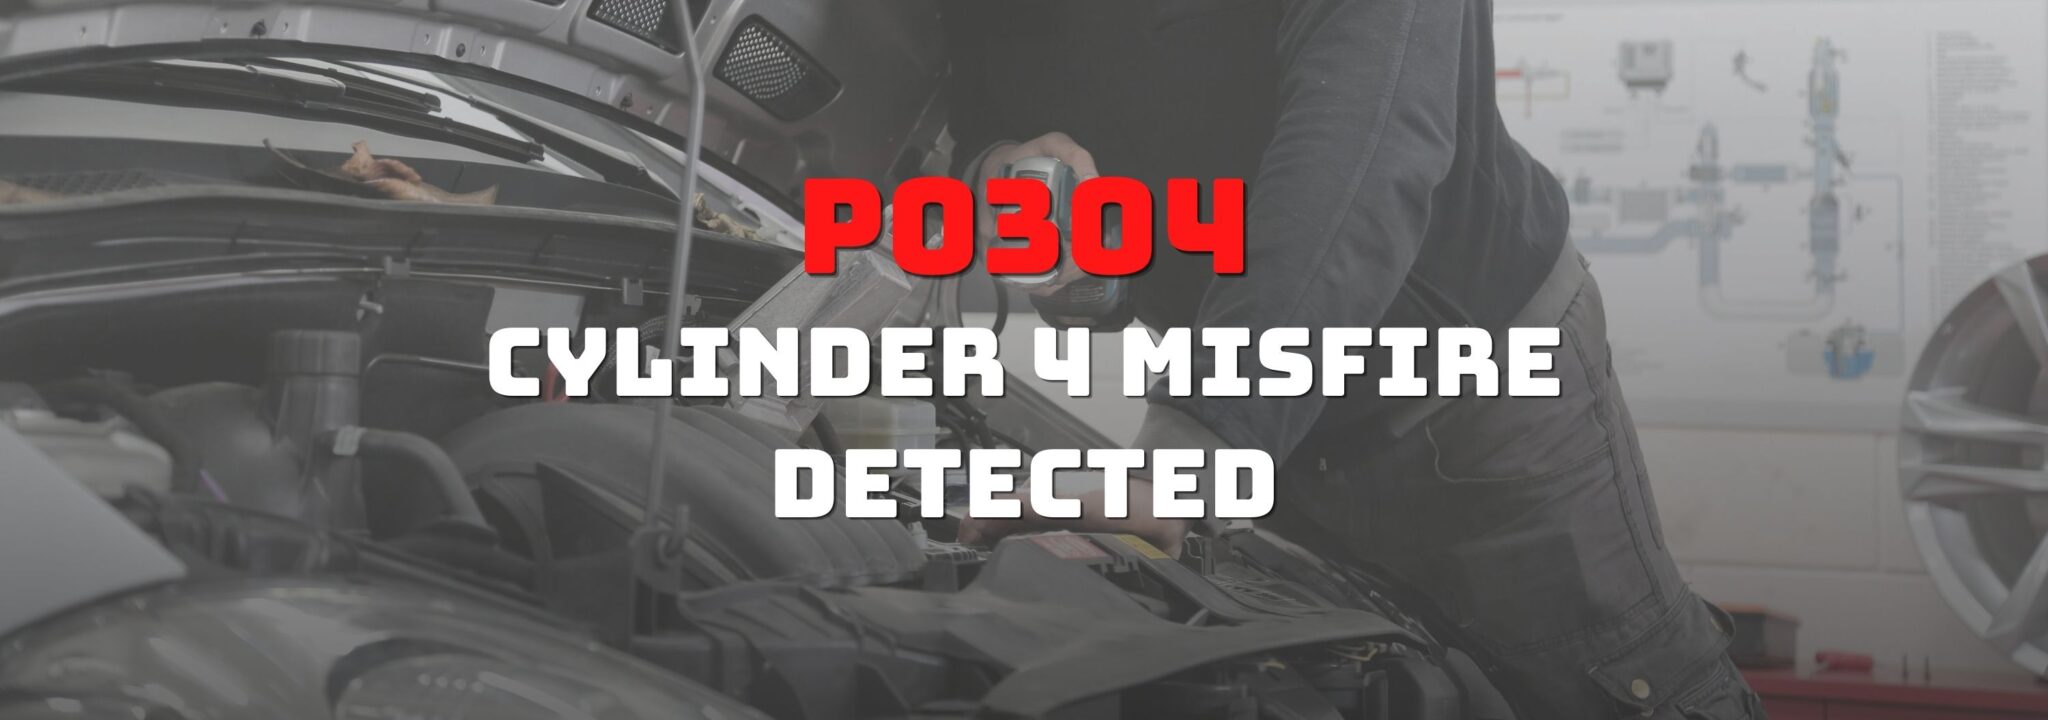 P0304 Cylinder 4 Misfire Detected